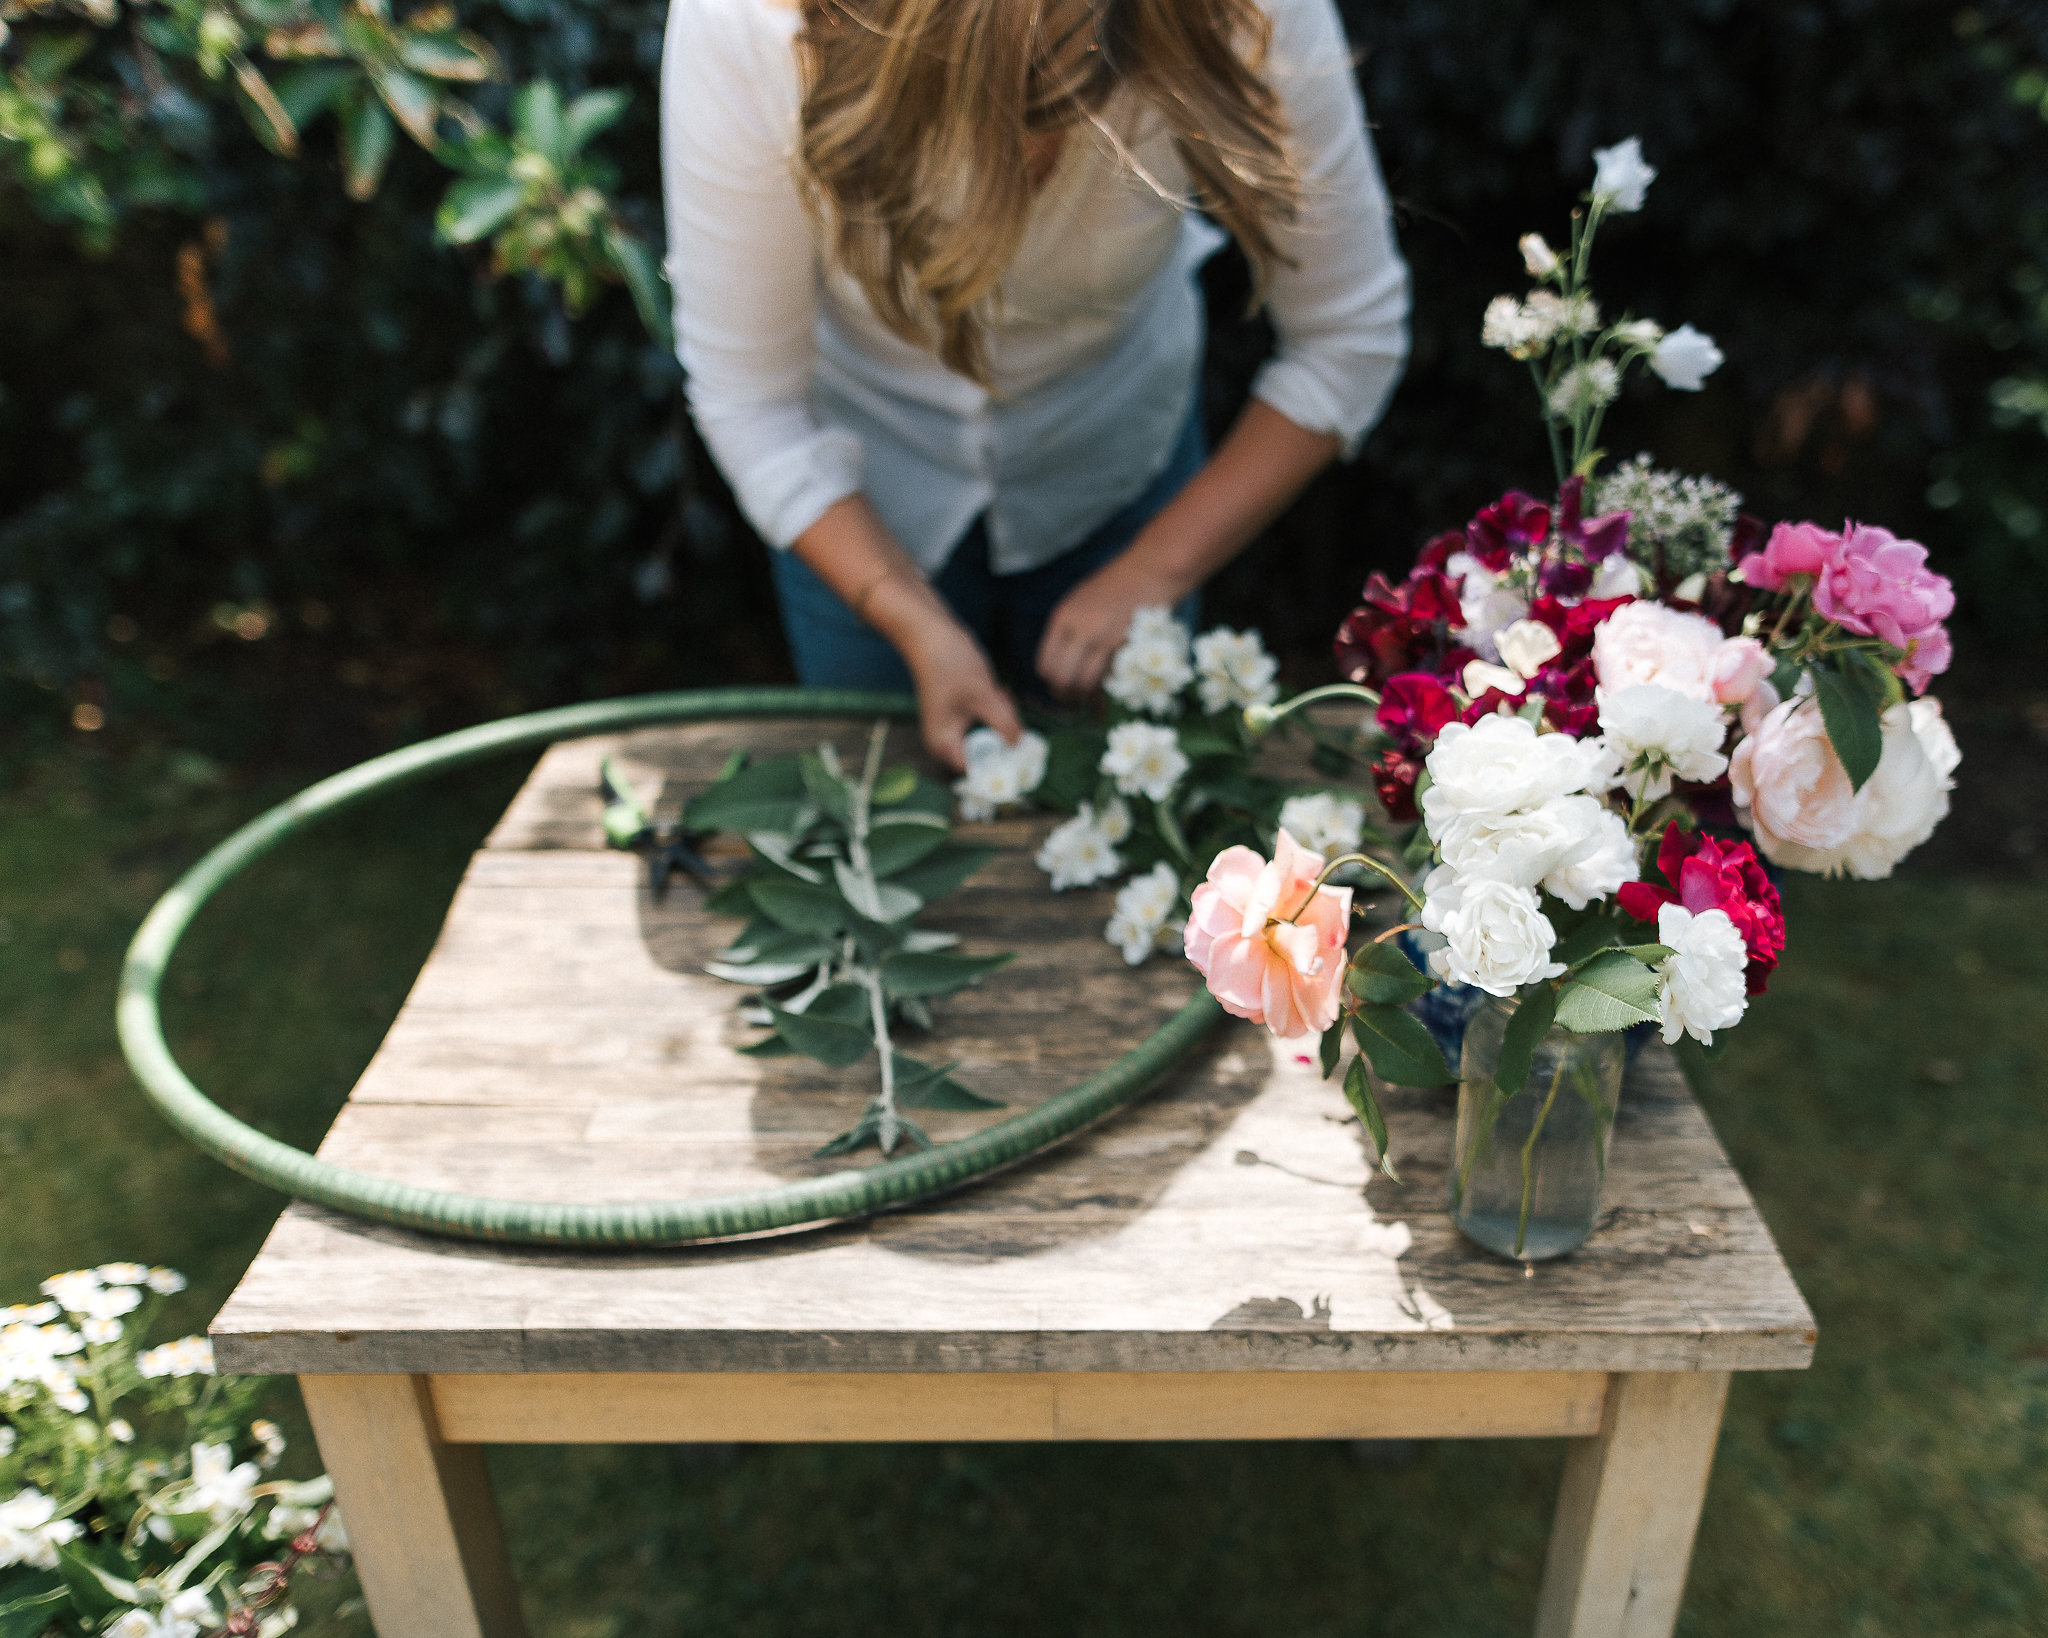 Make a floral hoop decoration - summer party styling